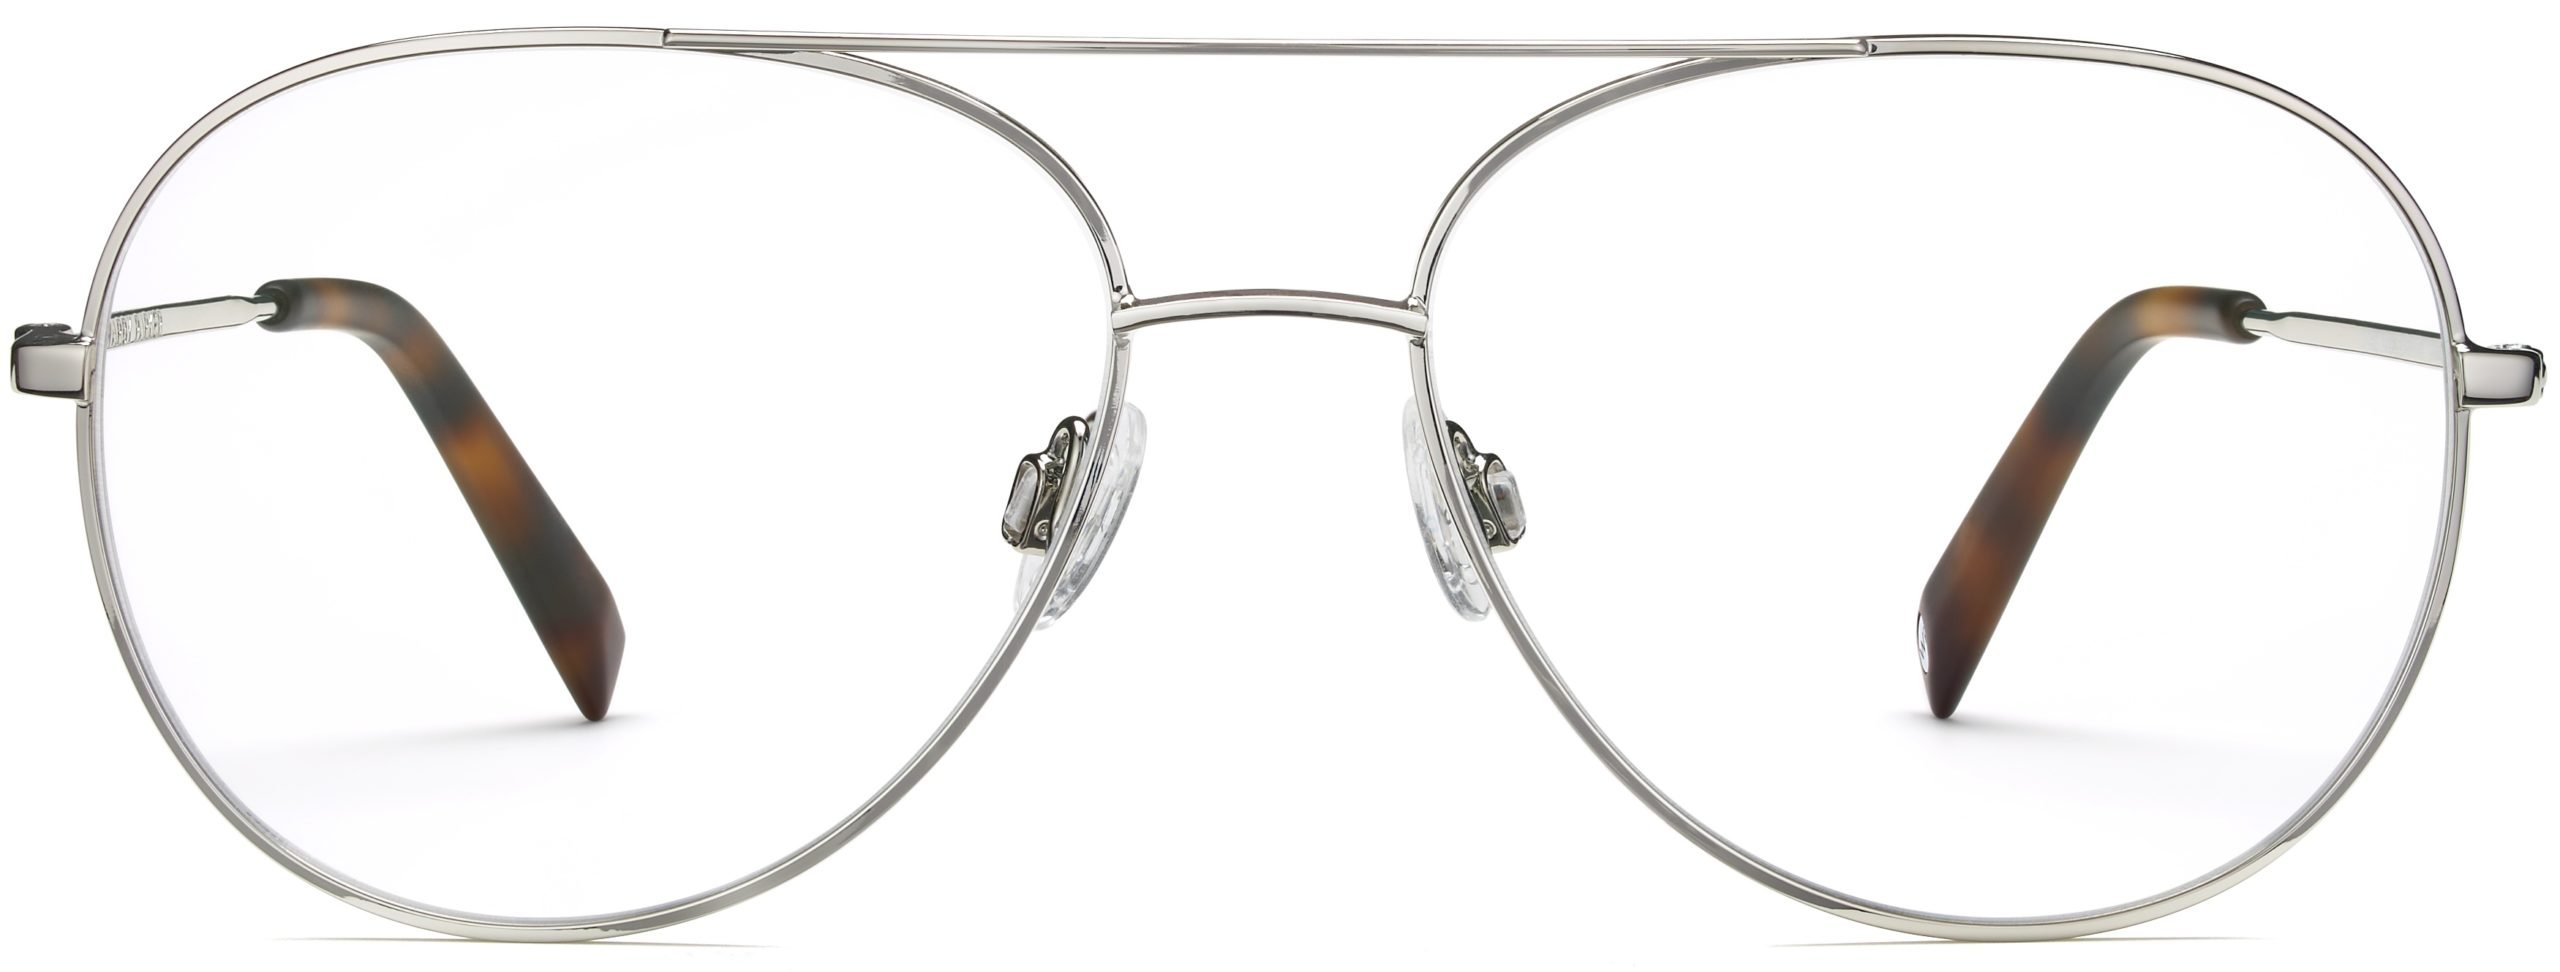 York glasses in polished silver